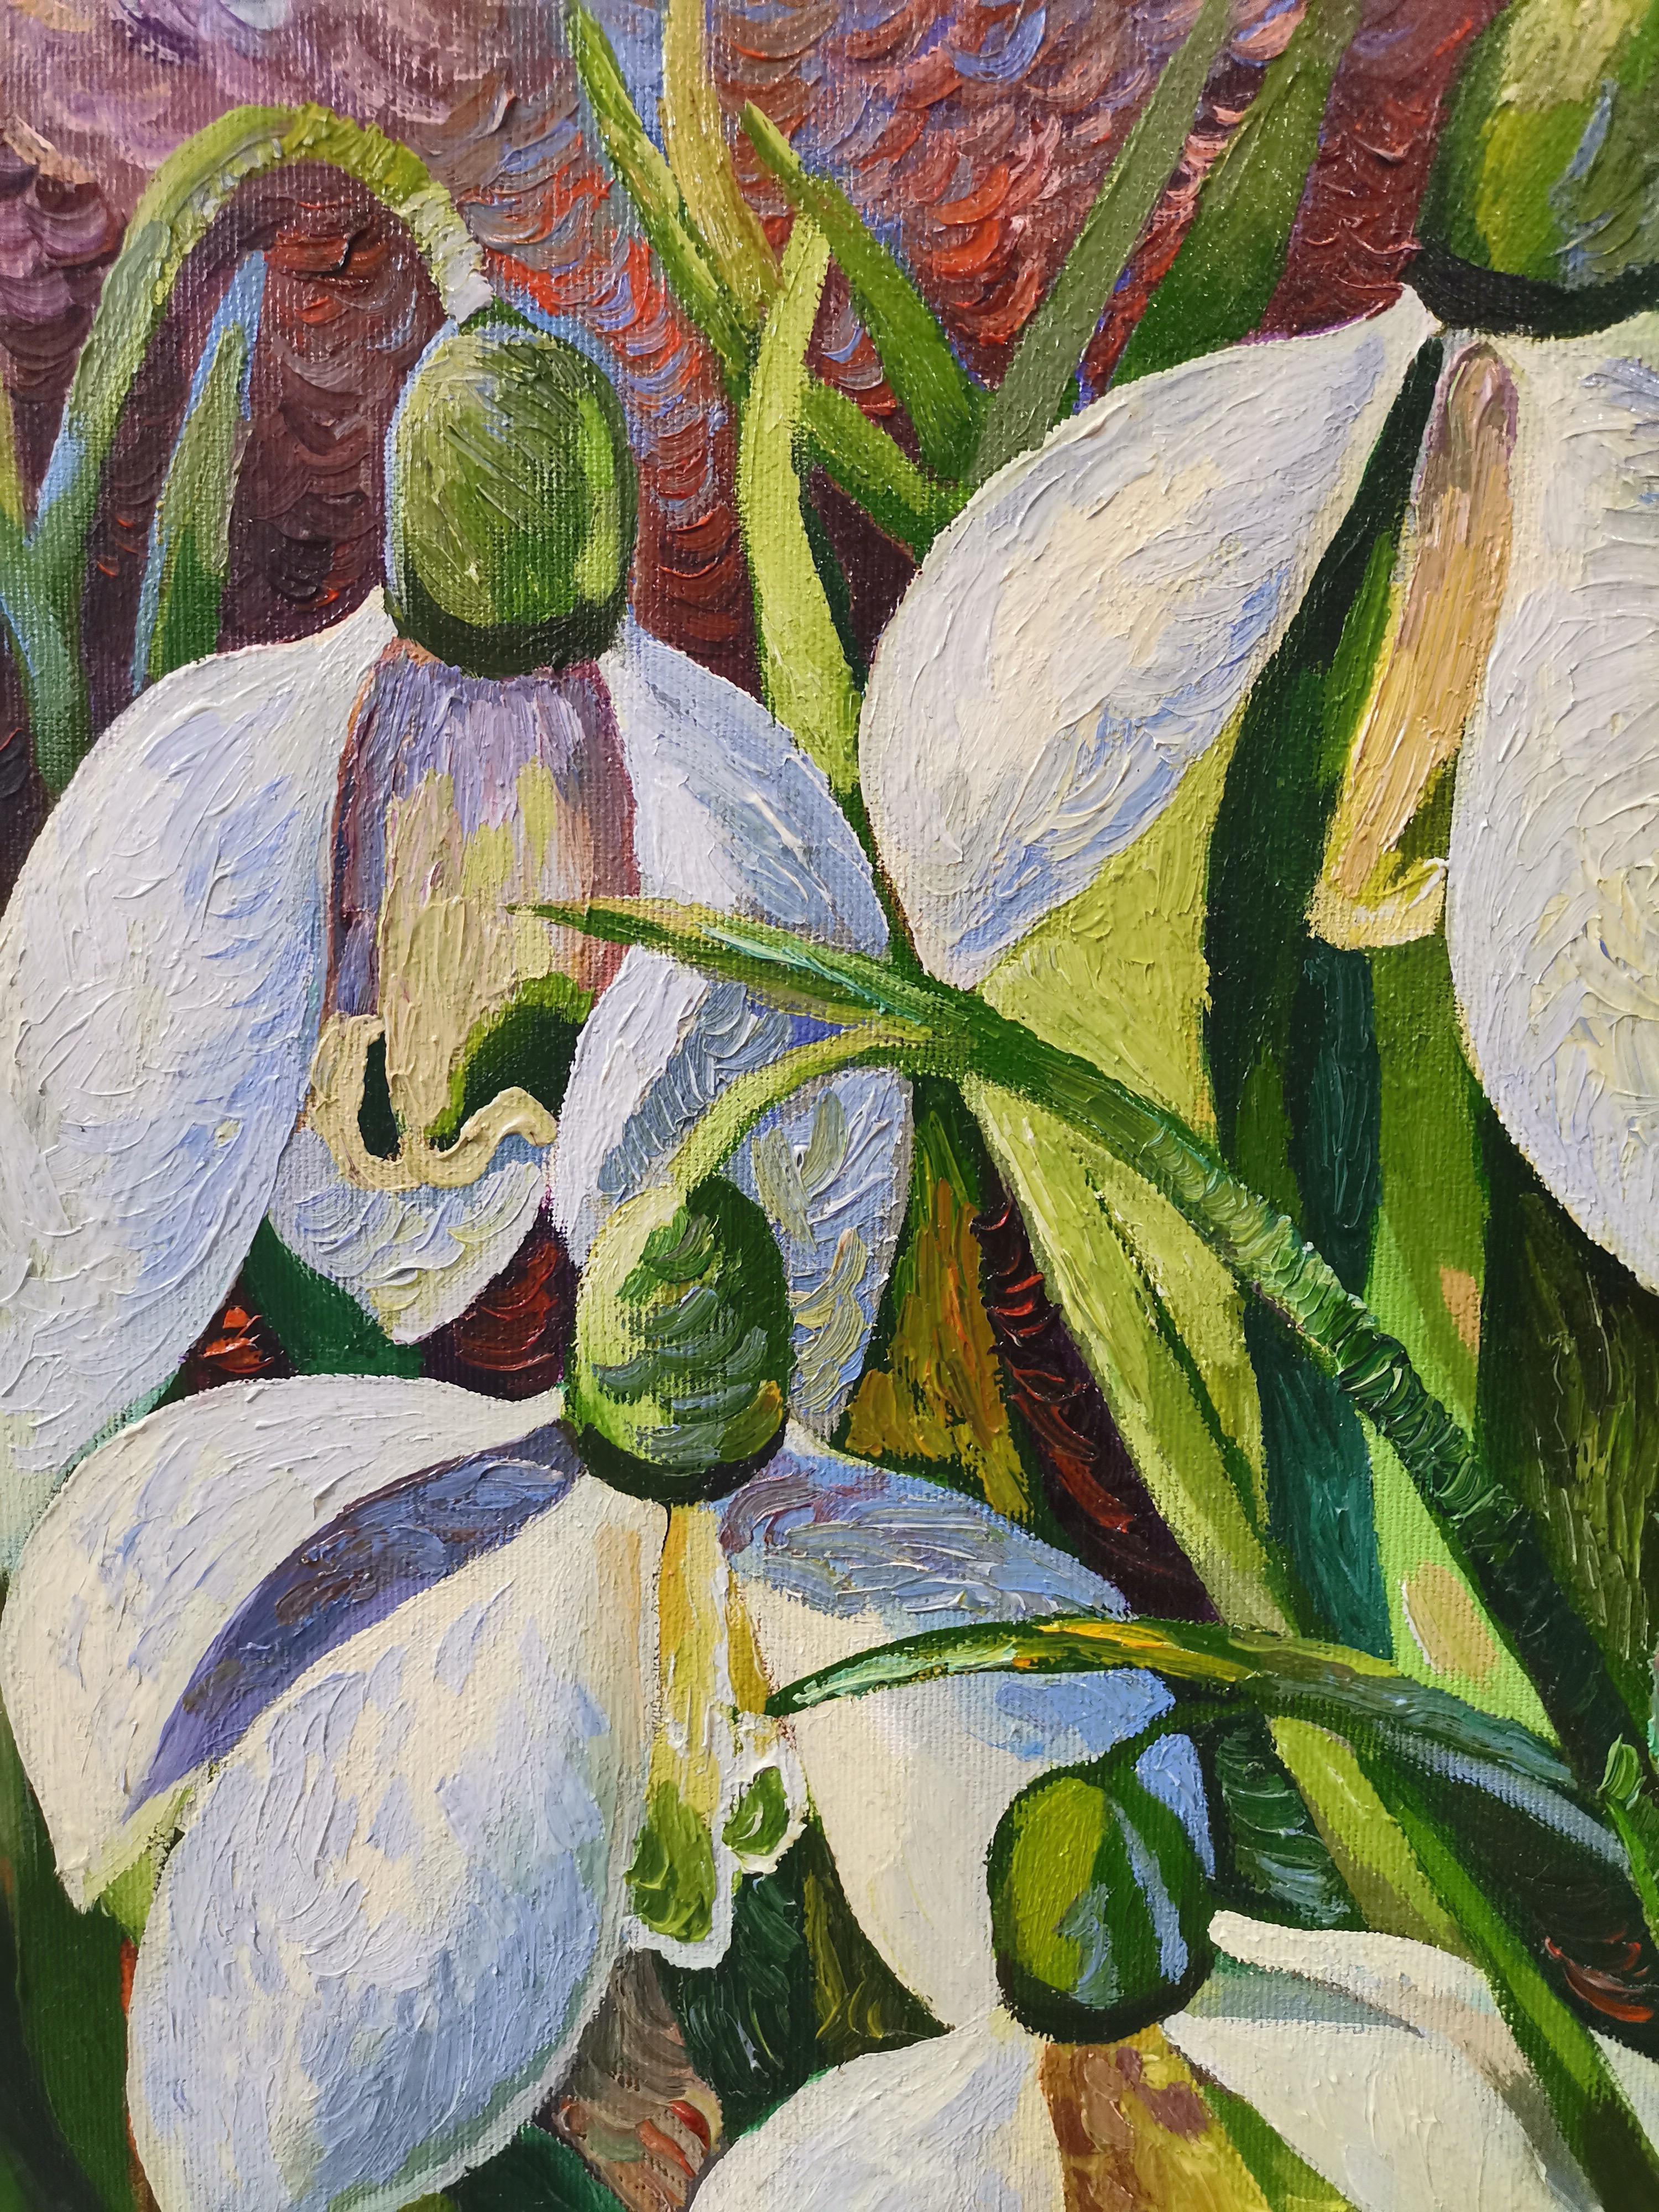 Snow Drops - Still Life Painting Oil Green Blue White Grey Brown Black Red For Sale 1